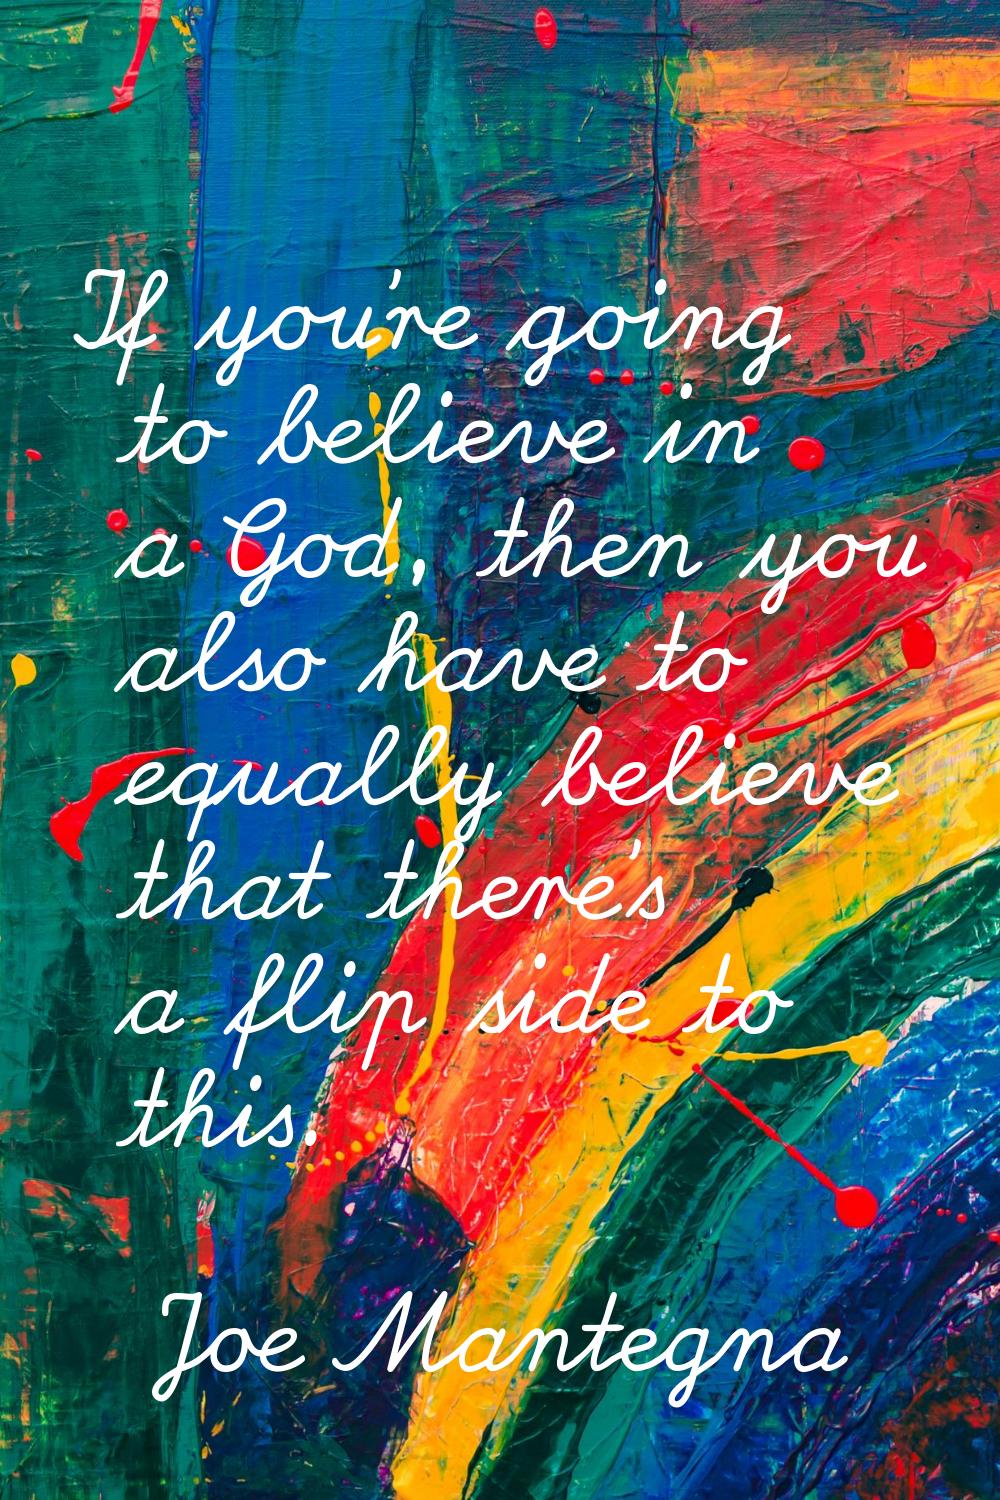 If you're going to believe in a God, then you also have to equally believe that there's a flip side